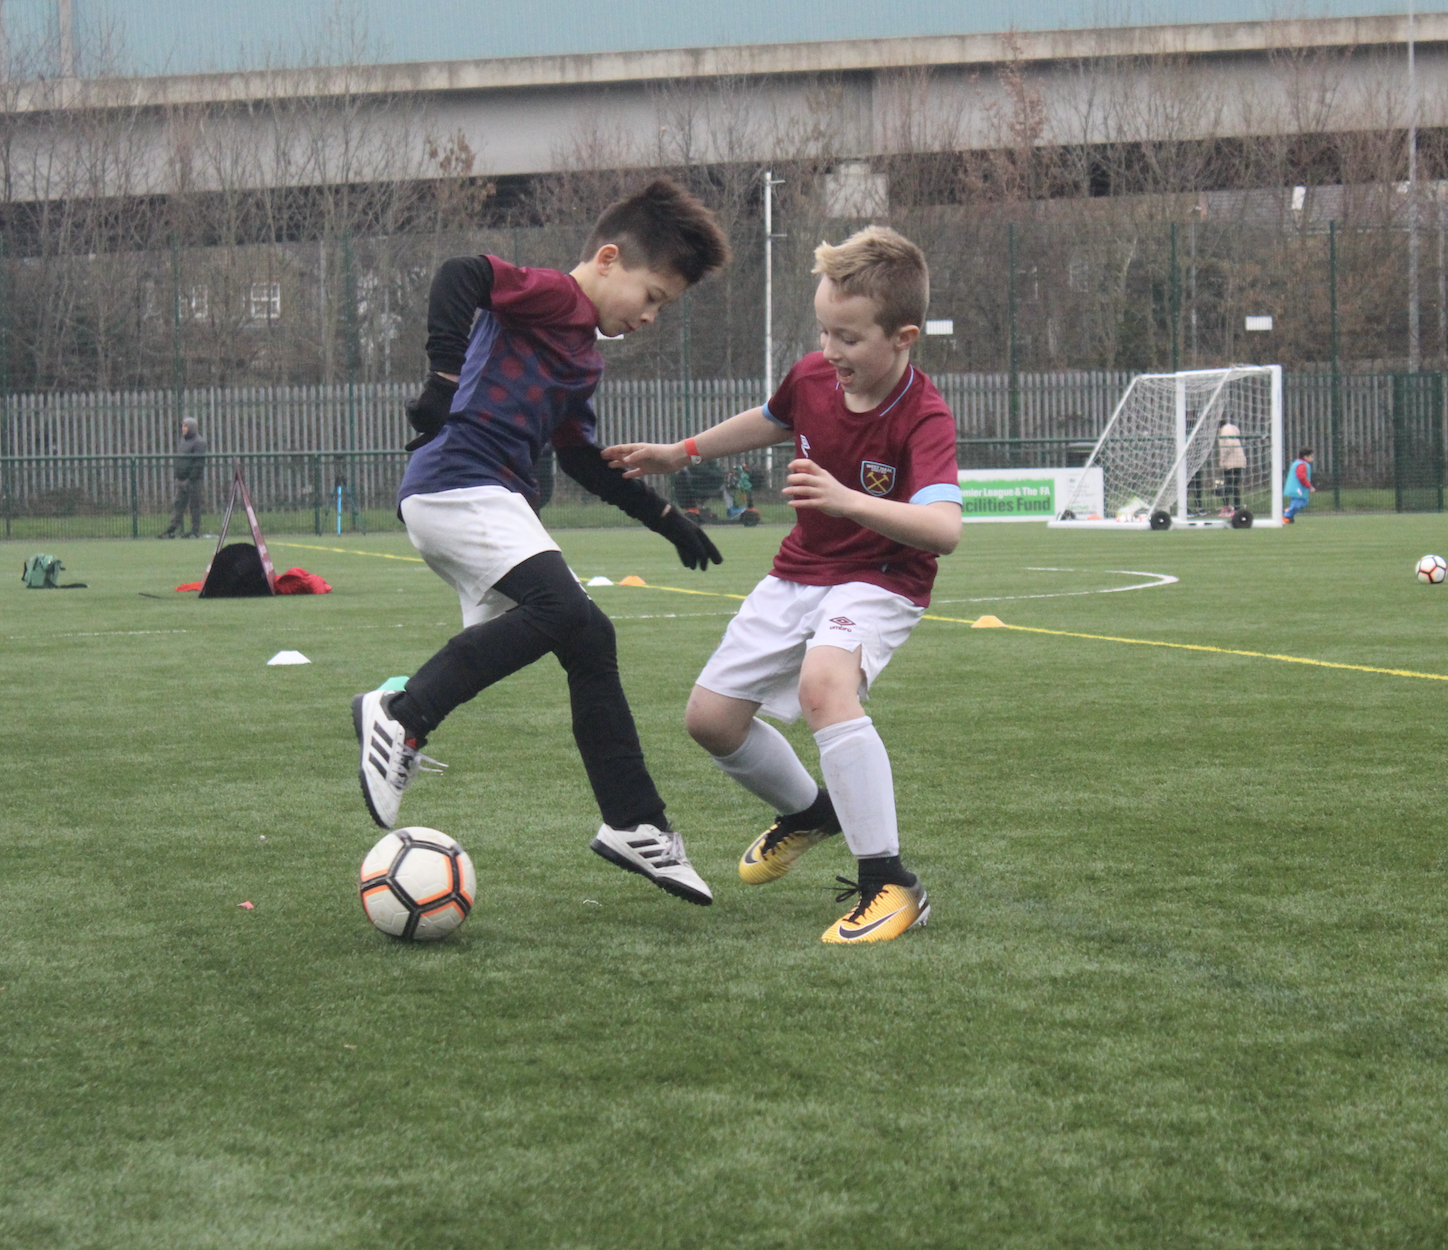 The Foundation provides a football development pathway